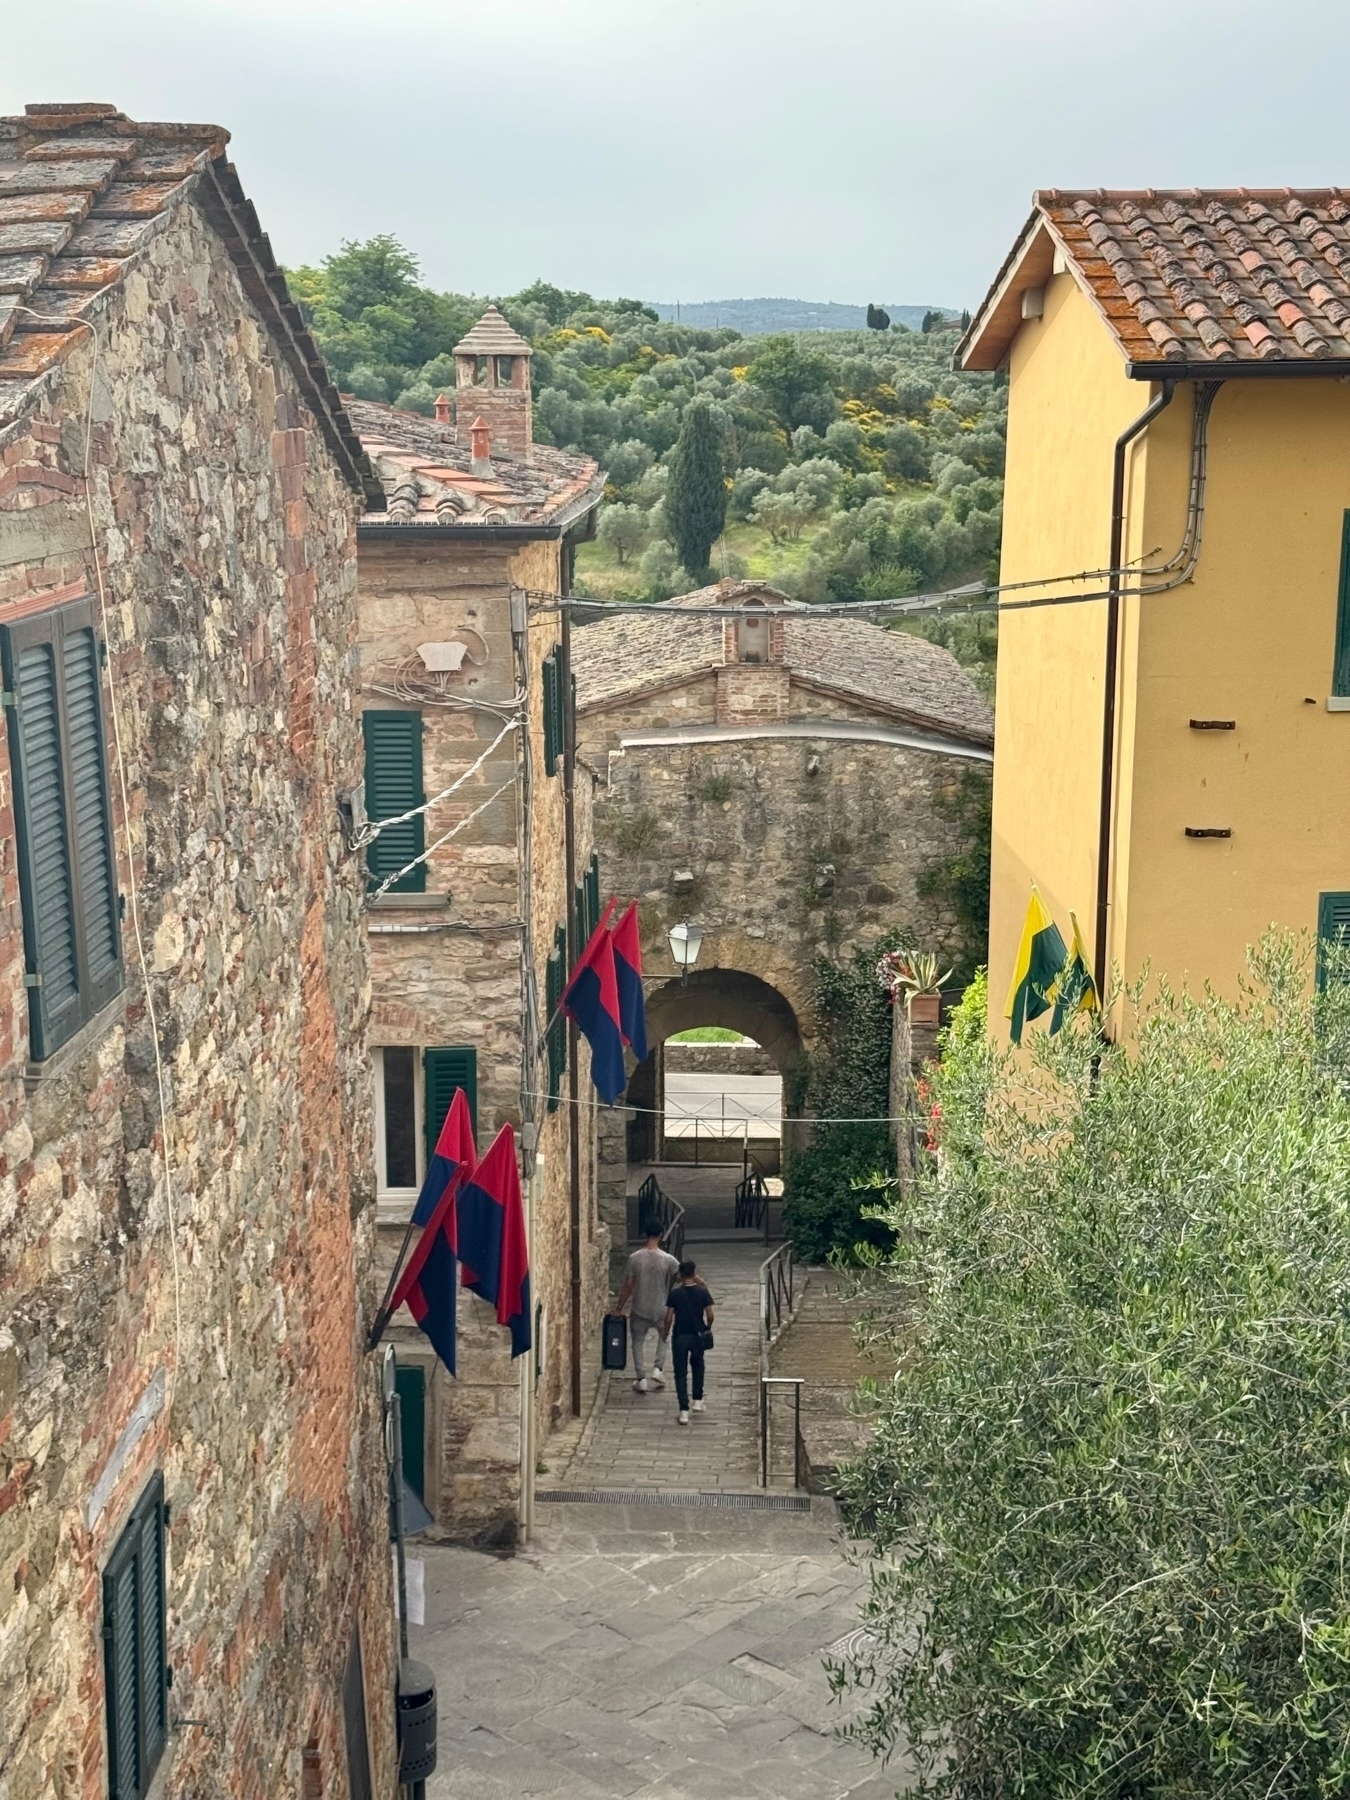 A narrow stone alley in a quaint village lined with rustic buildings adorned with red and blue flags. Two people walk down the steps towards an archway. Greenery and trees are visible in the background, adding to the scene’s charm.